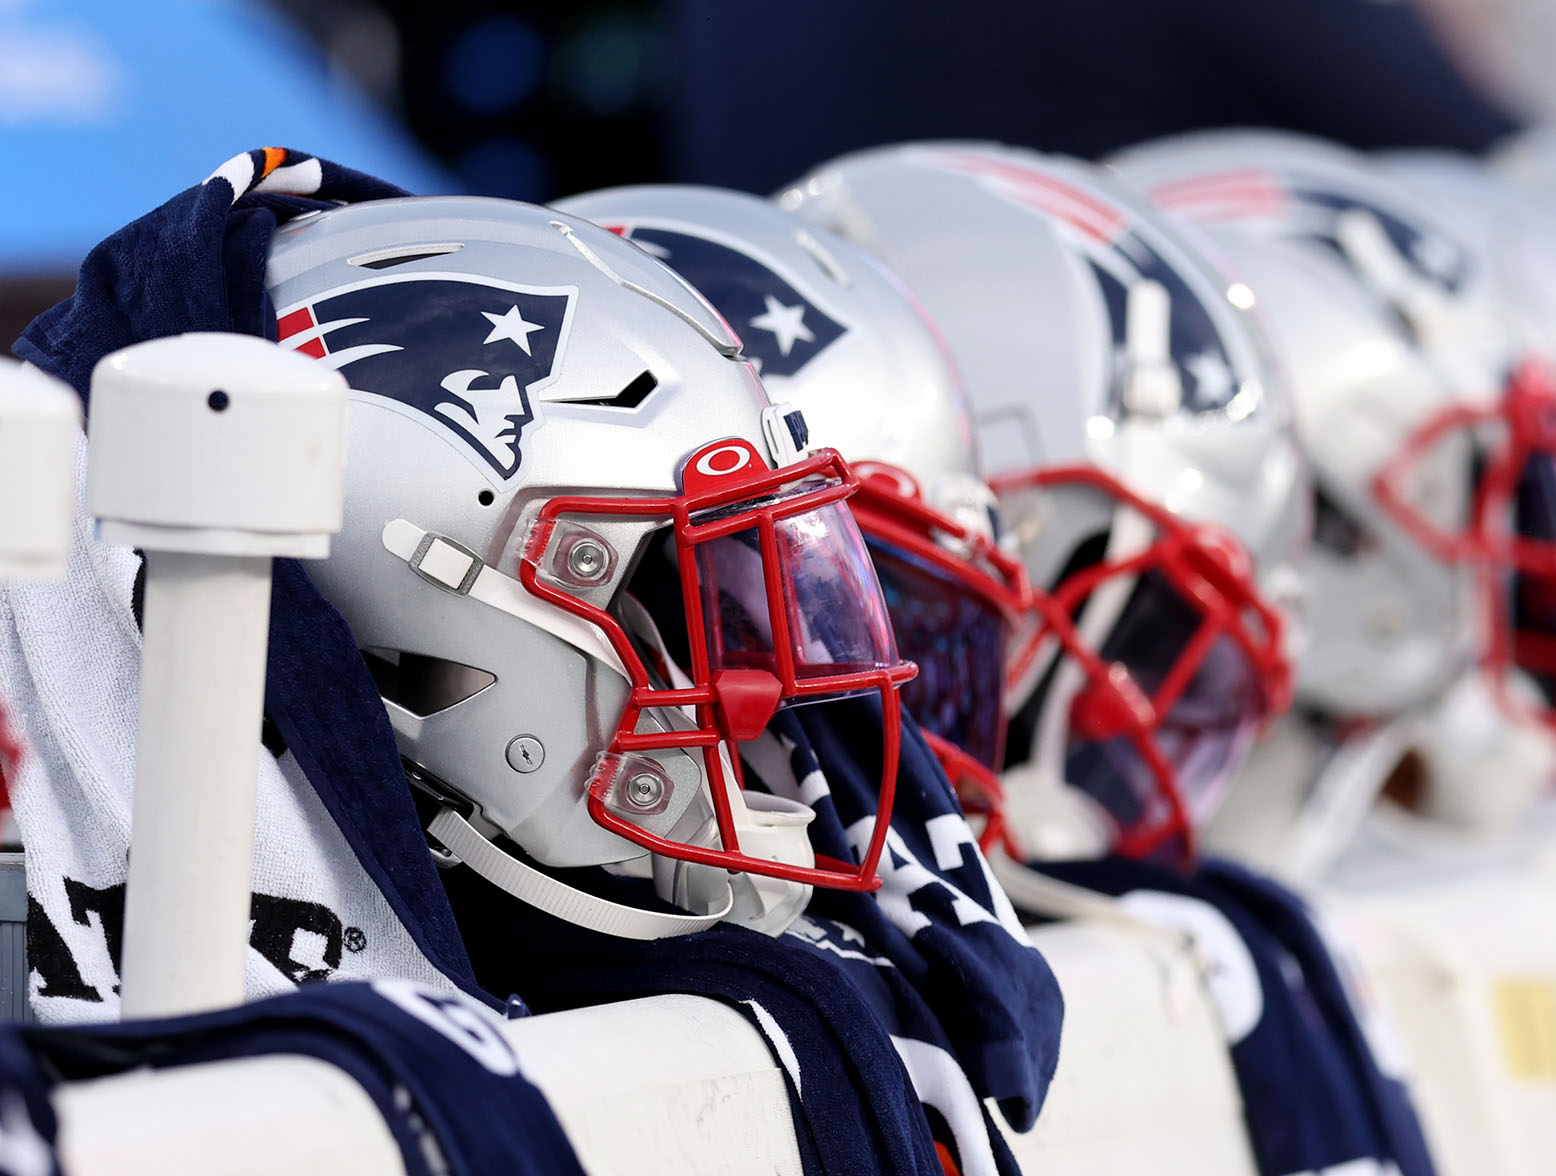 FOXBOROUGH, MASSACHUSETTS - AUGUST 11: A view of New England Patriots helmets on the bench during the preseason game between the New York Giants and the New England Patriots at Gillette Stadium on August 11, 2022 in Foxborough, Massachusetts. (Photo by Maddie Meyer/Getty Images)